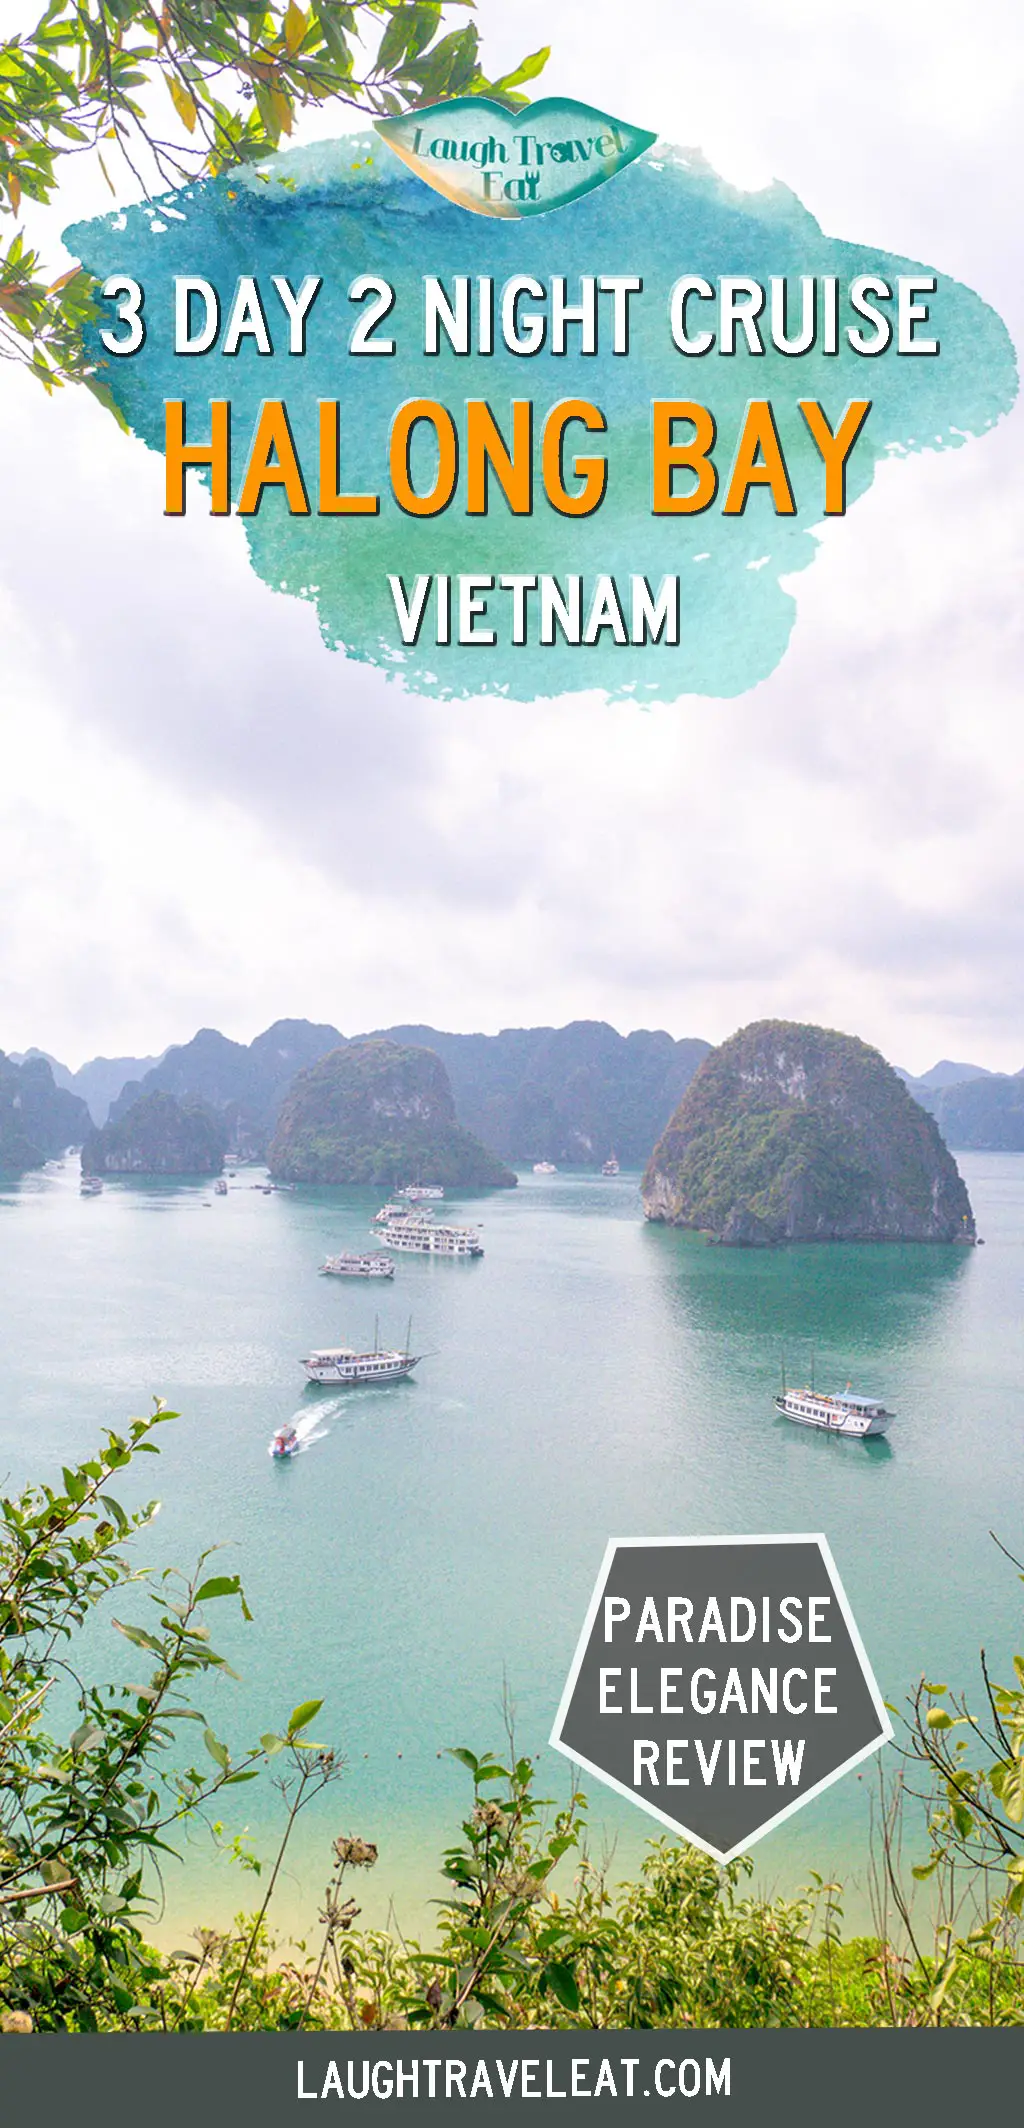 Want to go on a Halong Bay overnight cruise? Paradise Elegance might be perfect for you: here's a review on this Halong Bay trip #halongbay #cruise #review #vietnam